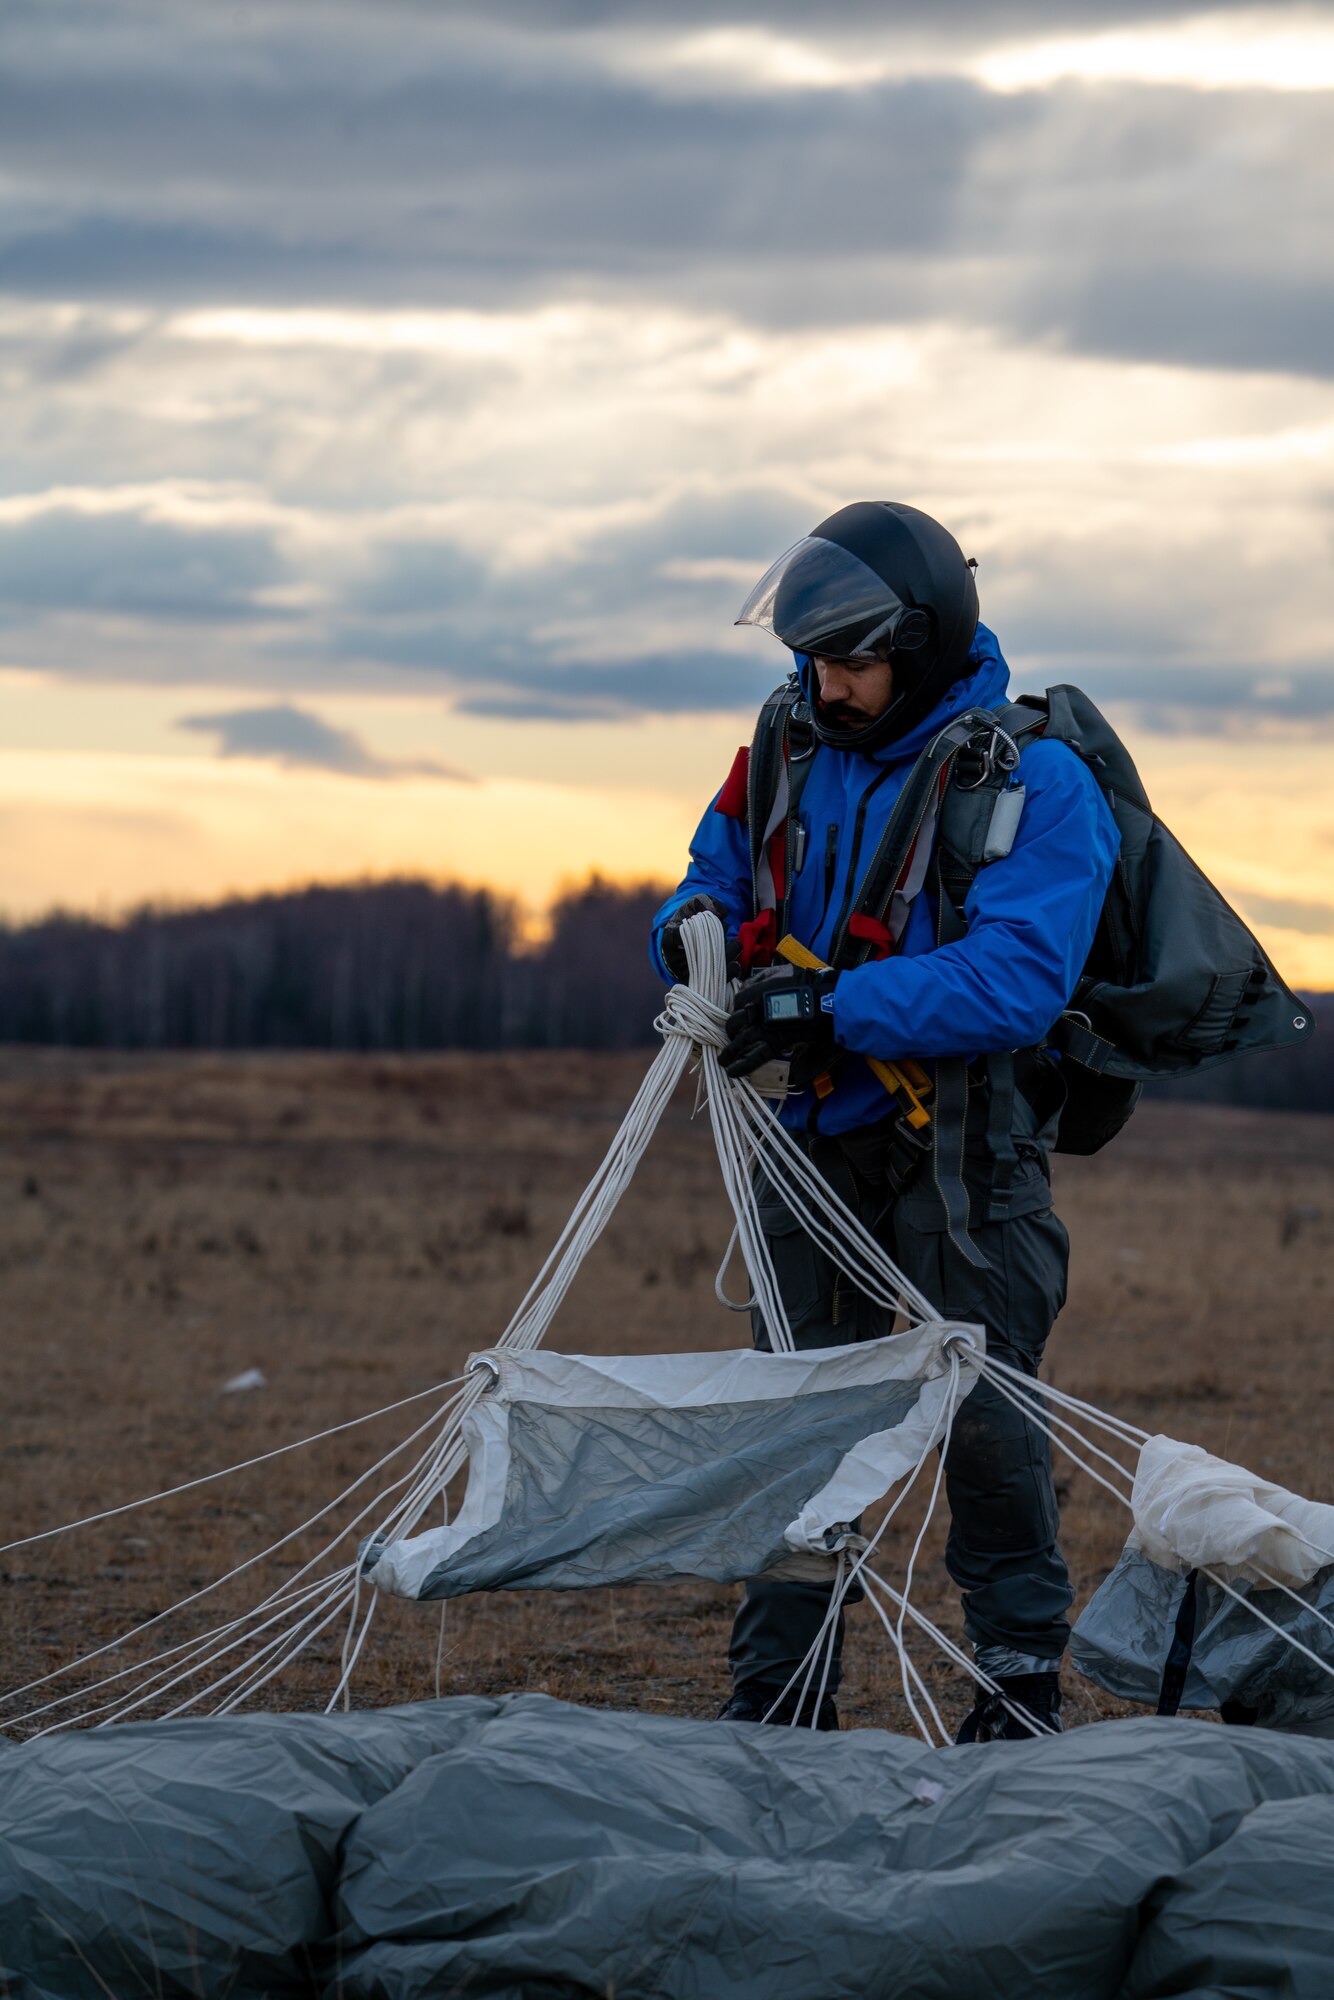 U.S. Air Force Staff Sgt. Thomas Aycart-Meija, a pararescueman assigned to the 212th Rescue Squadron, Alaska Air National Guard, recovers his parachute after a successful jump at a Joint Base Elmendorf-Richardson.